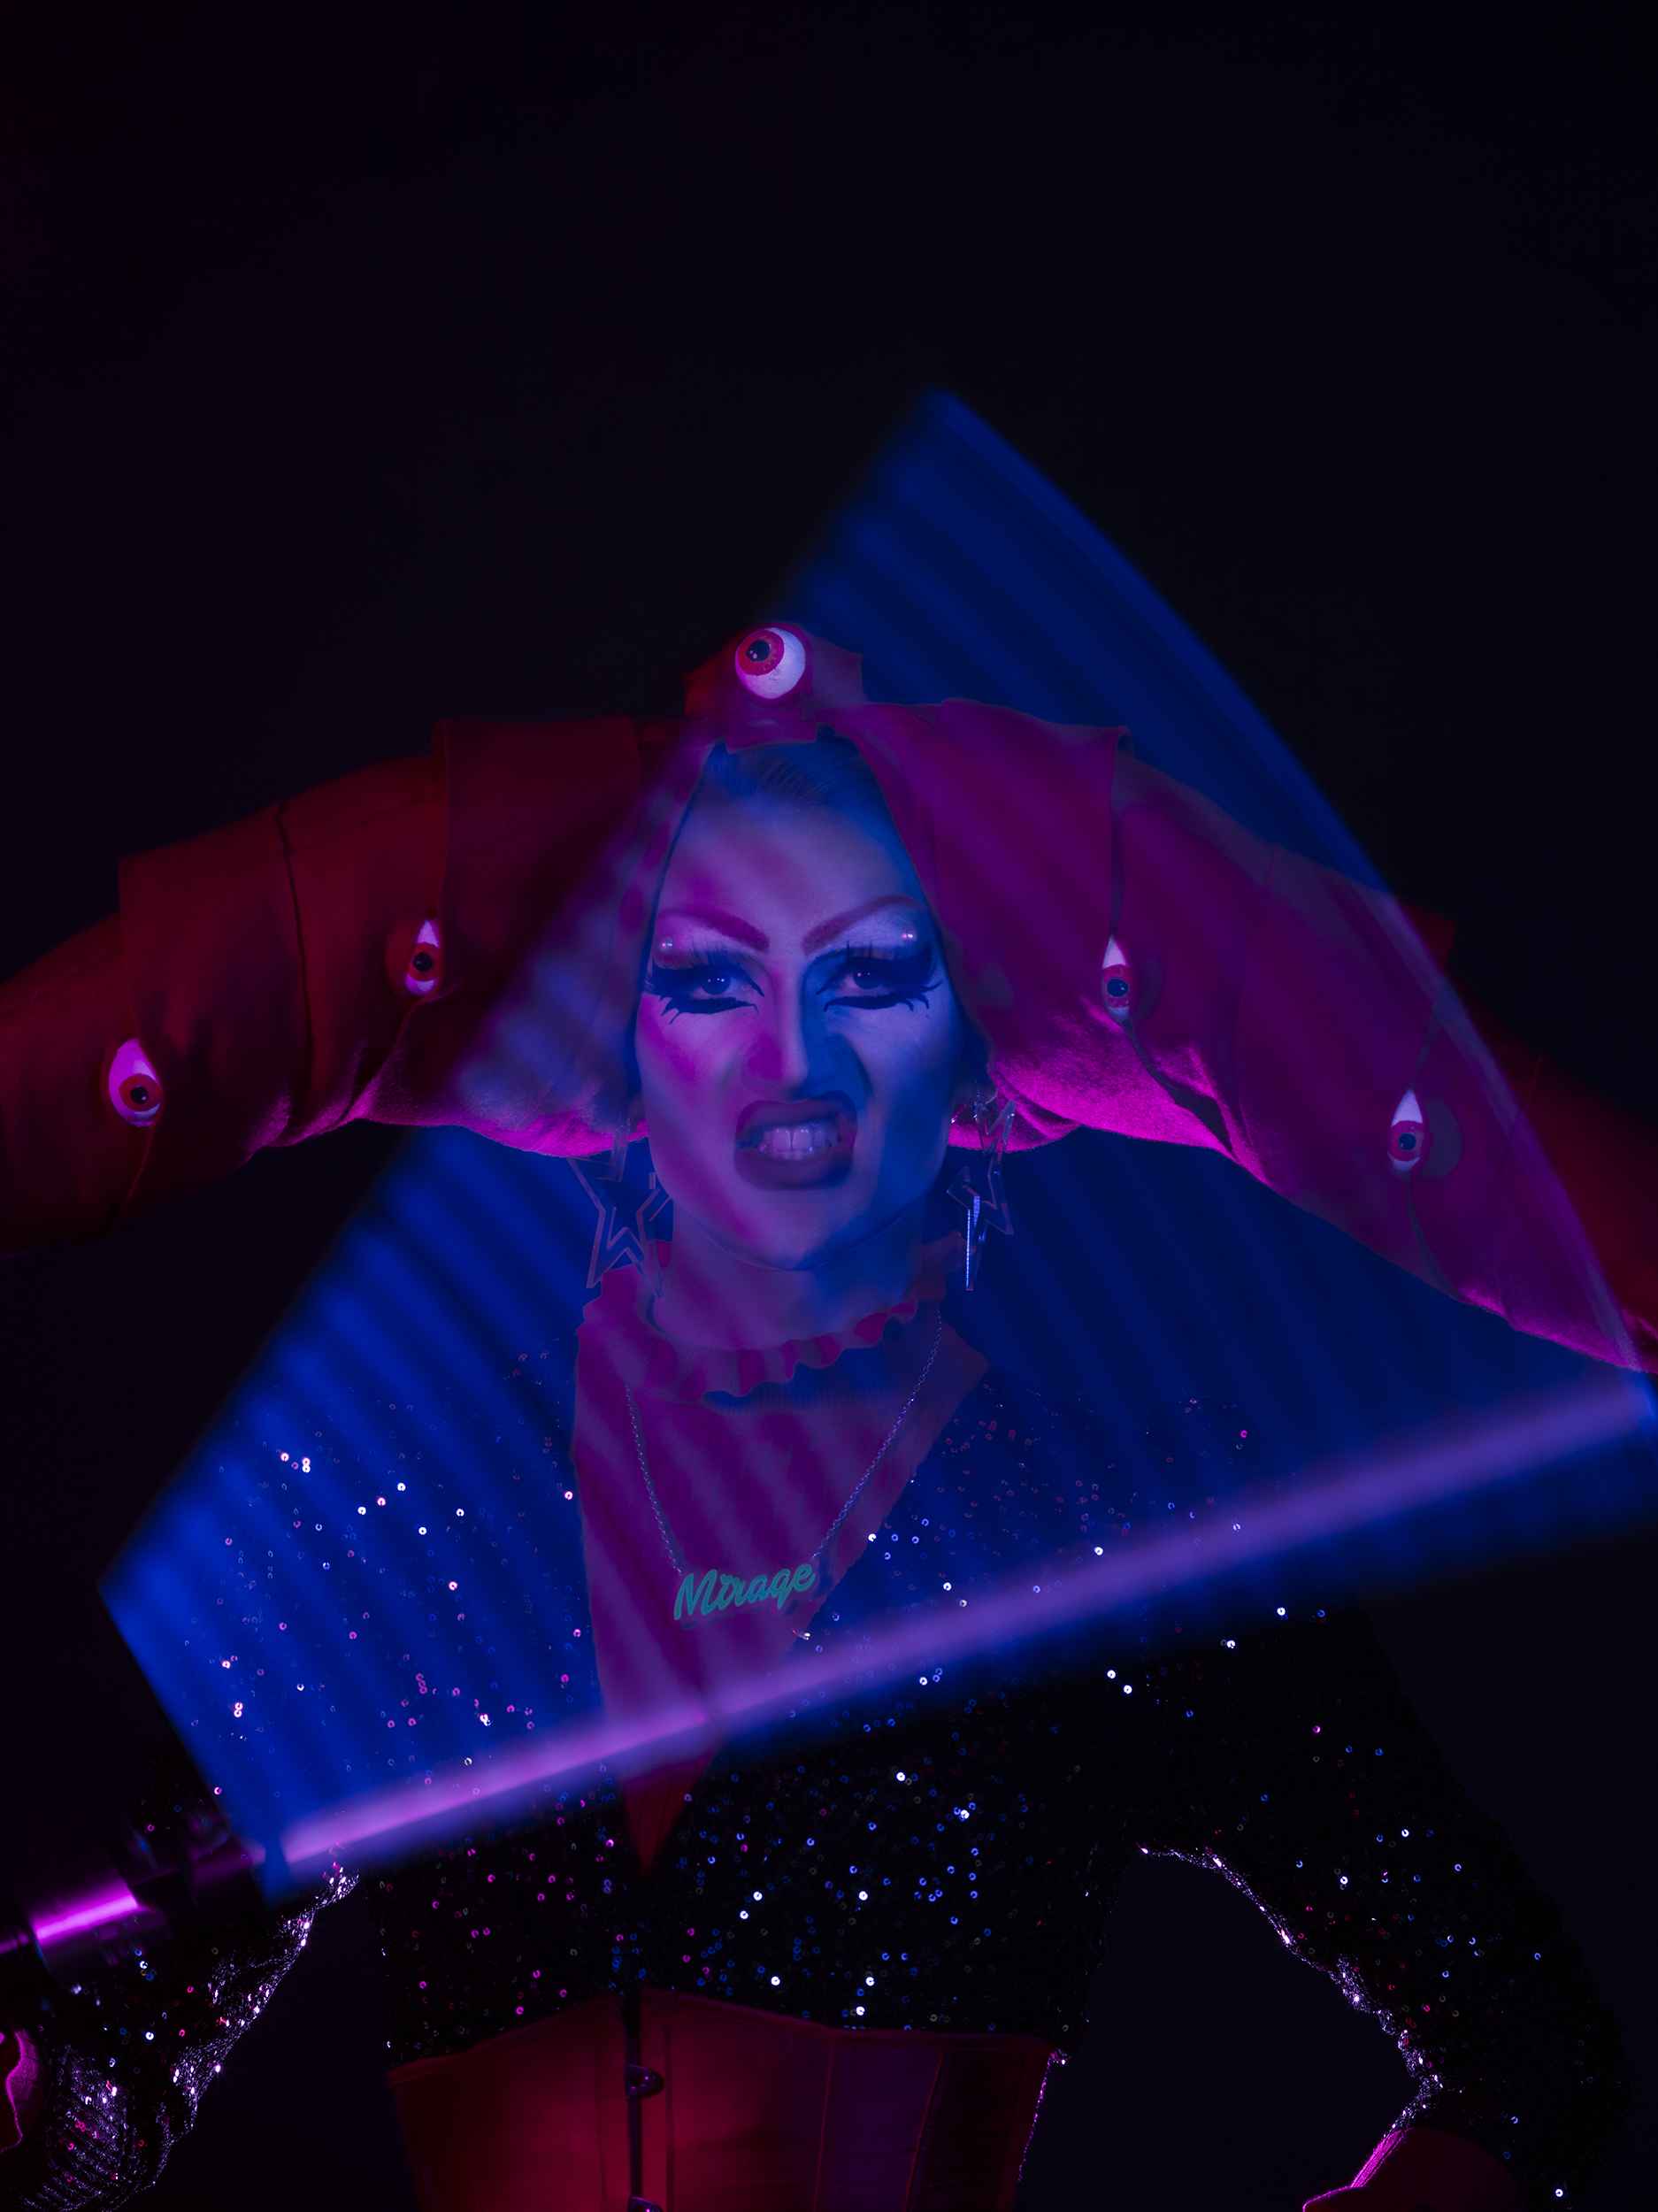 BA Photography work by Micha Hollis showing a portrait of drag artist Blue Monday. The lighting is multi-coloured with pink on the left and blue on the right.